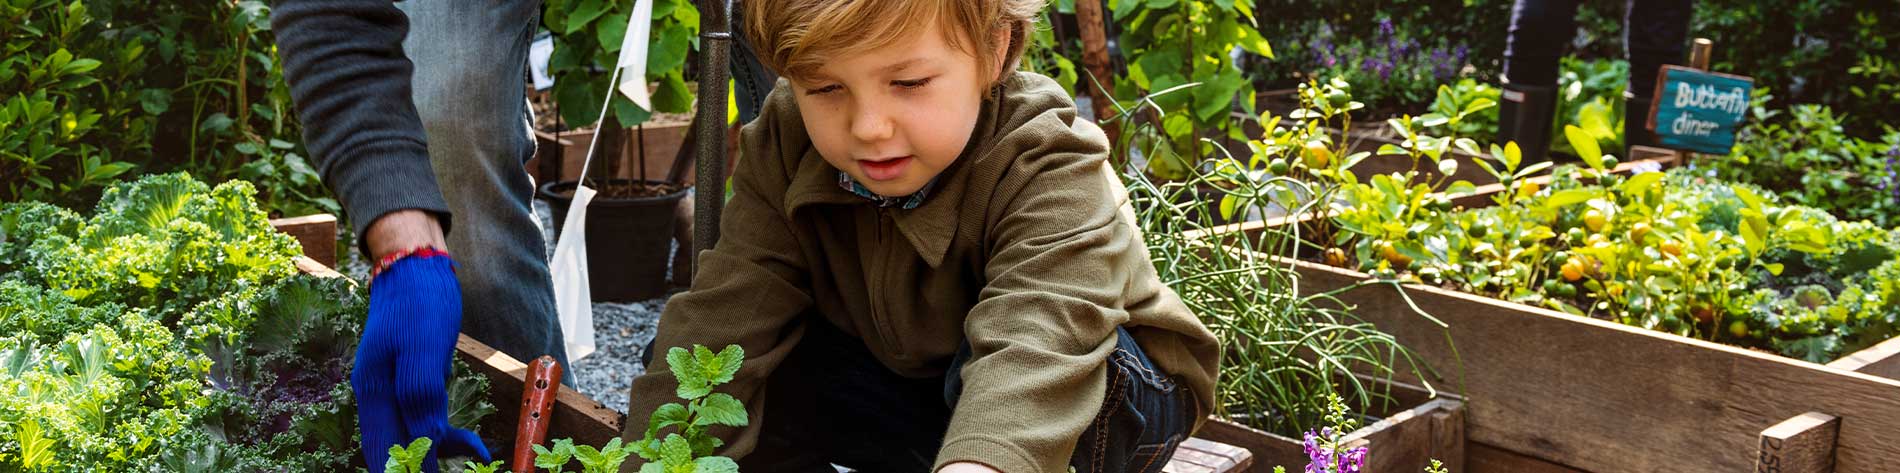 Young boy working in a community garden.